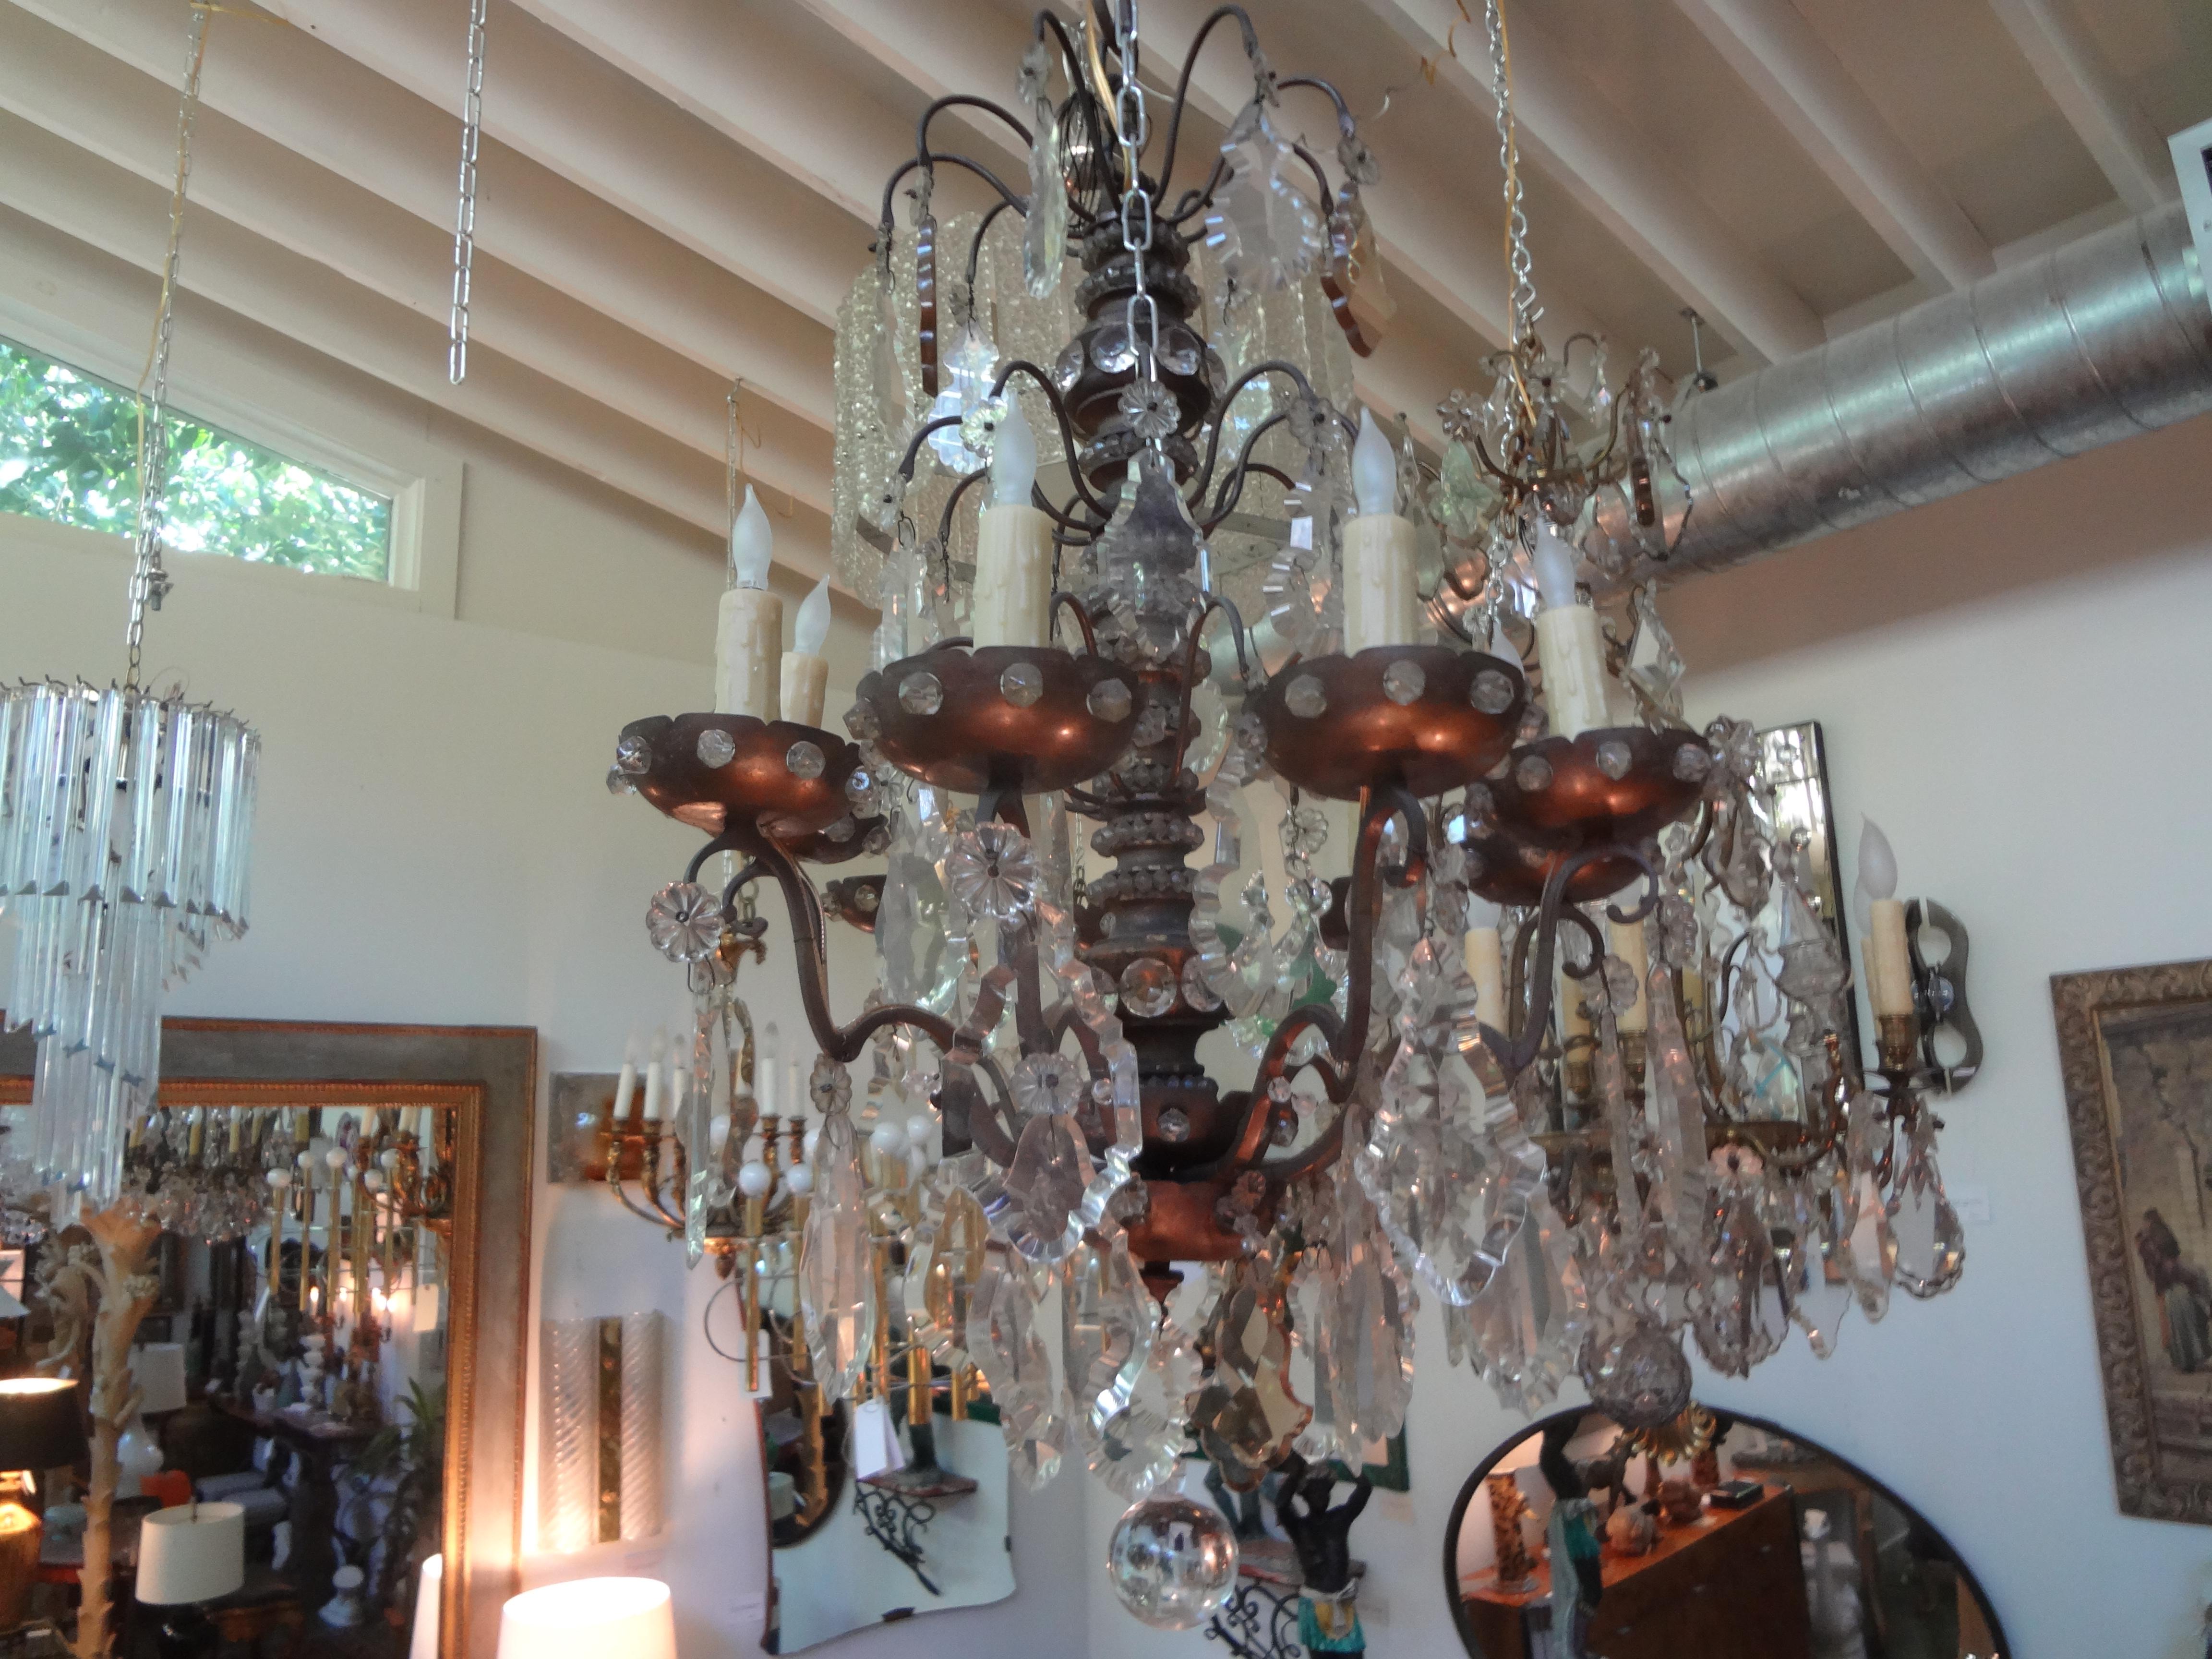 Antique French Maison Bagues attributed beaded and crystal chandelier.
Unusual French Maison Baguès attributed Louis XVI style bronze and wood beaded and crystal chandelier. This stunning French nine-light beaded and crystal chandelier has been